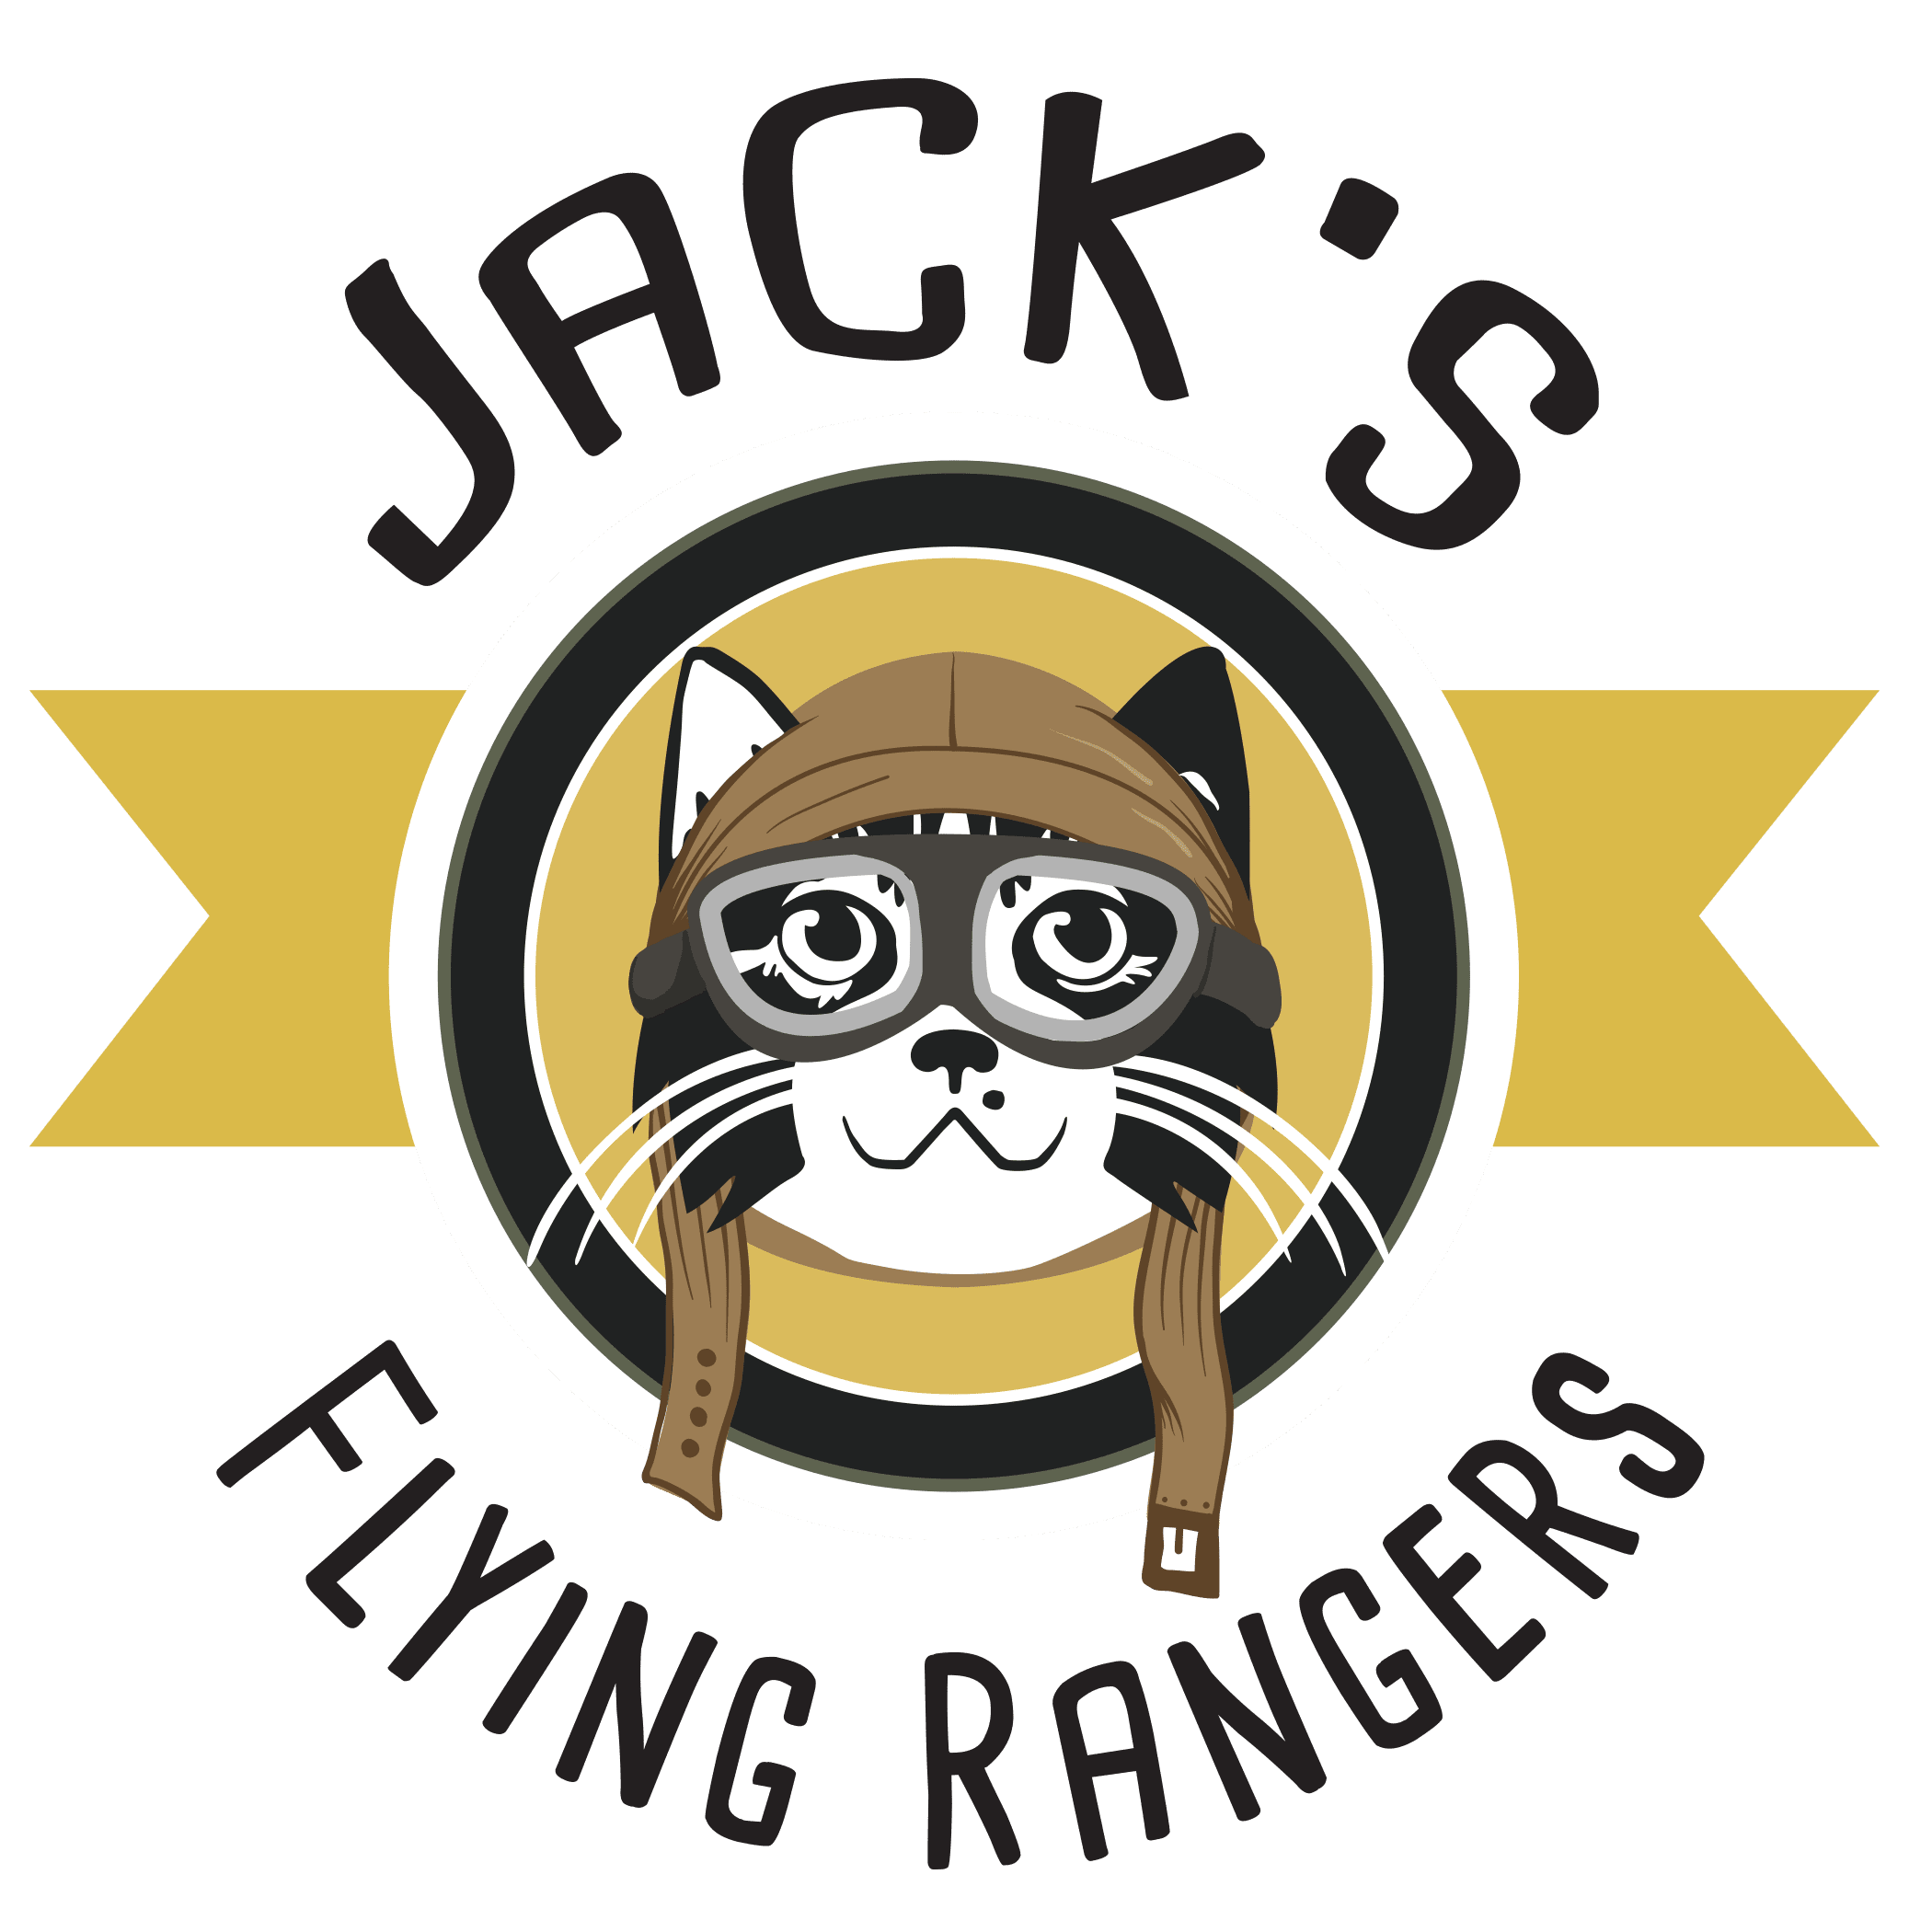 Read more about the article Jack’s Flying Rangers: Episode 1 | Monadnock Oil & Vinegar